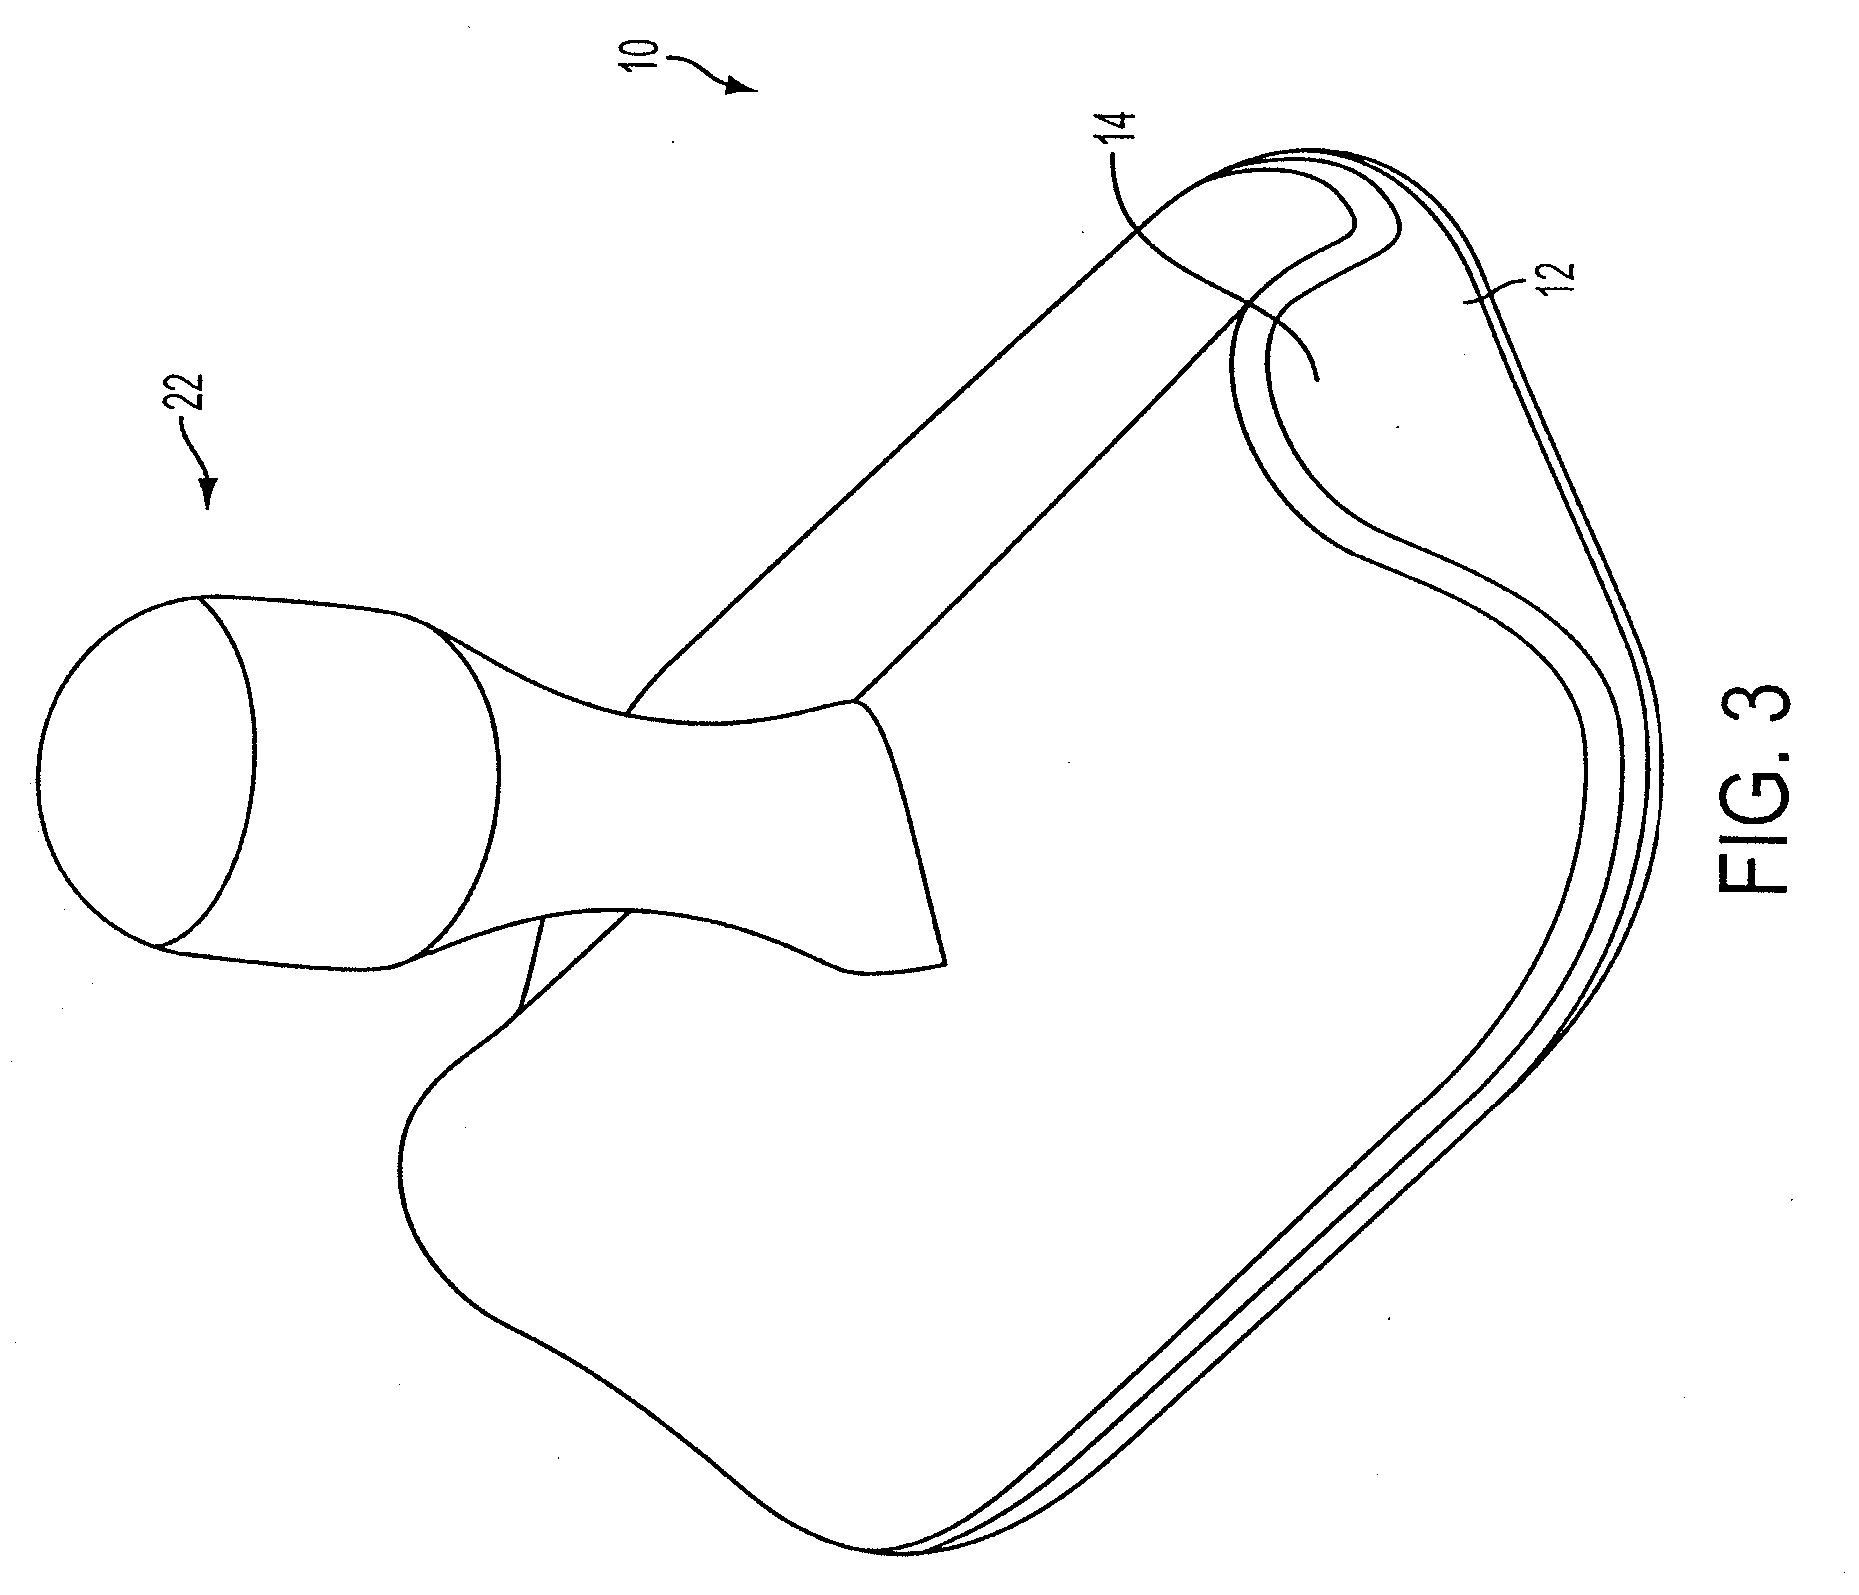 Method, apparatus and system for preventing or reducing the severity of hemorrhoids